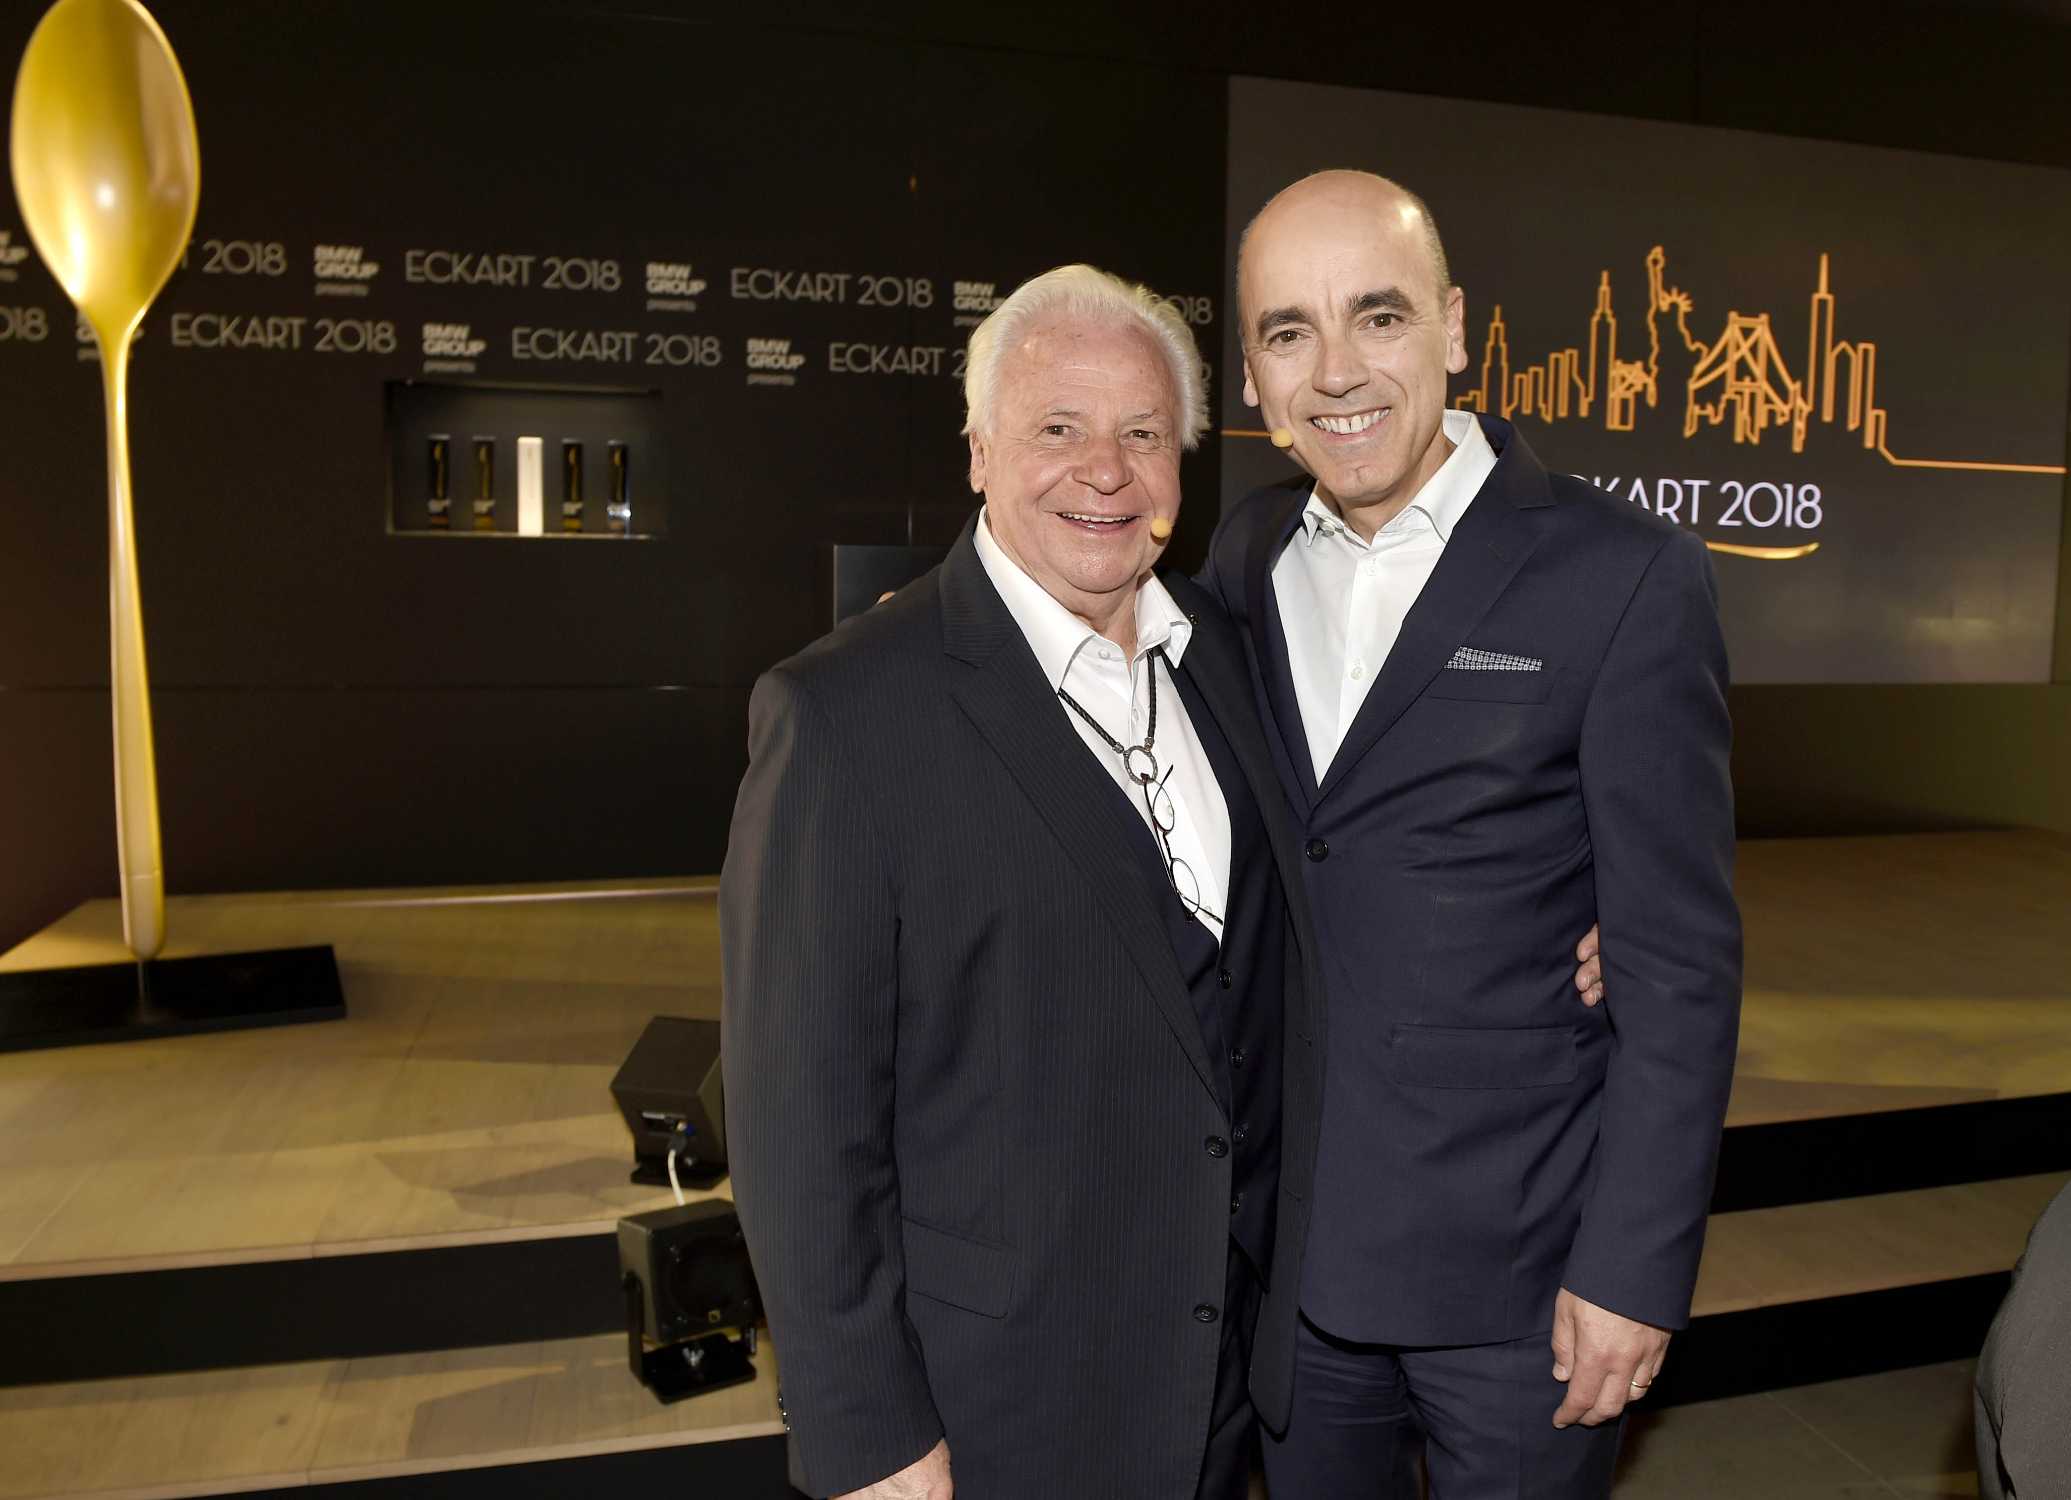 ECKART 2018 award ceremony presented by BMW Group on June 14th 2018 in the Spring Studios in New York City. Eckart Witzigmann and Dr. Nicolas Peter, member of the Board of Management of BMW AG, Finance, and patron of the ECKART. (06/2018)